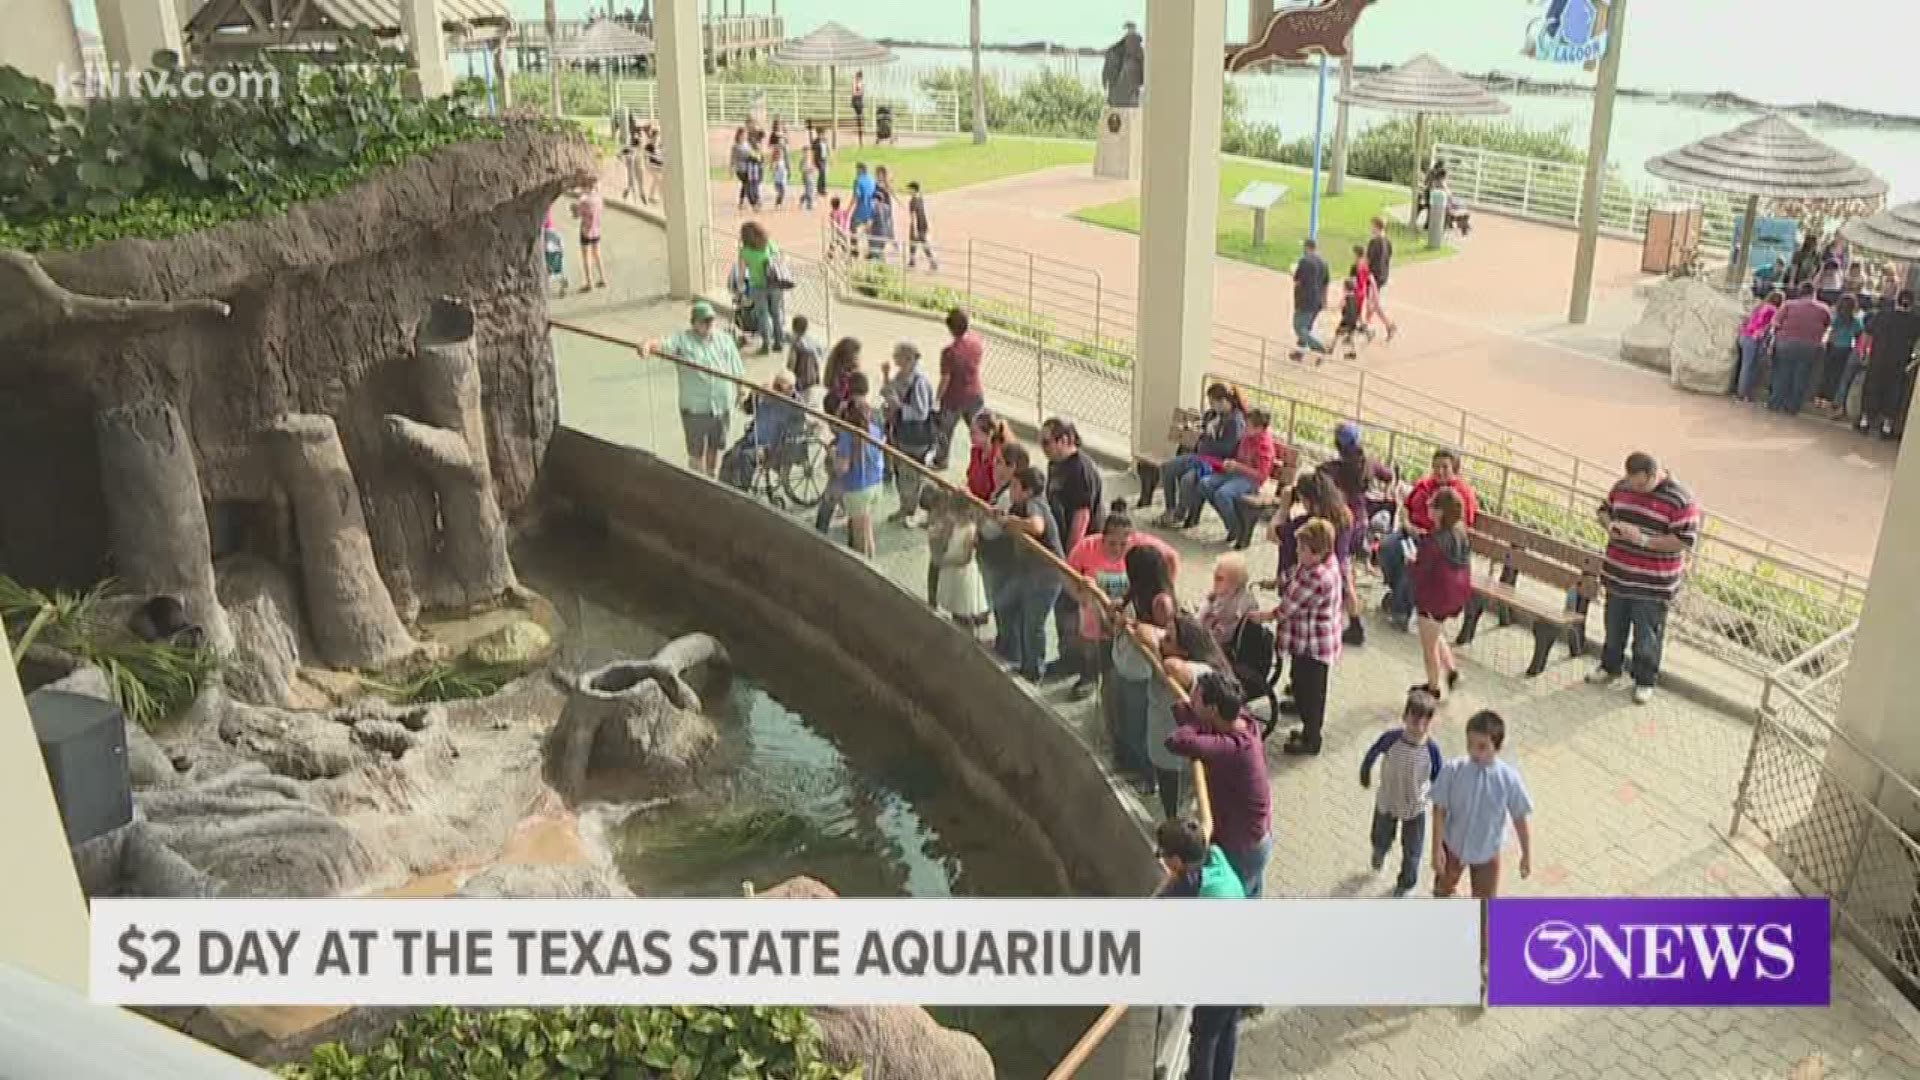 From 10 a.m.-5 p.m. Sunday, Oct. 20, residents can visit the Texas State Aquarium for just $2 per person.